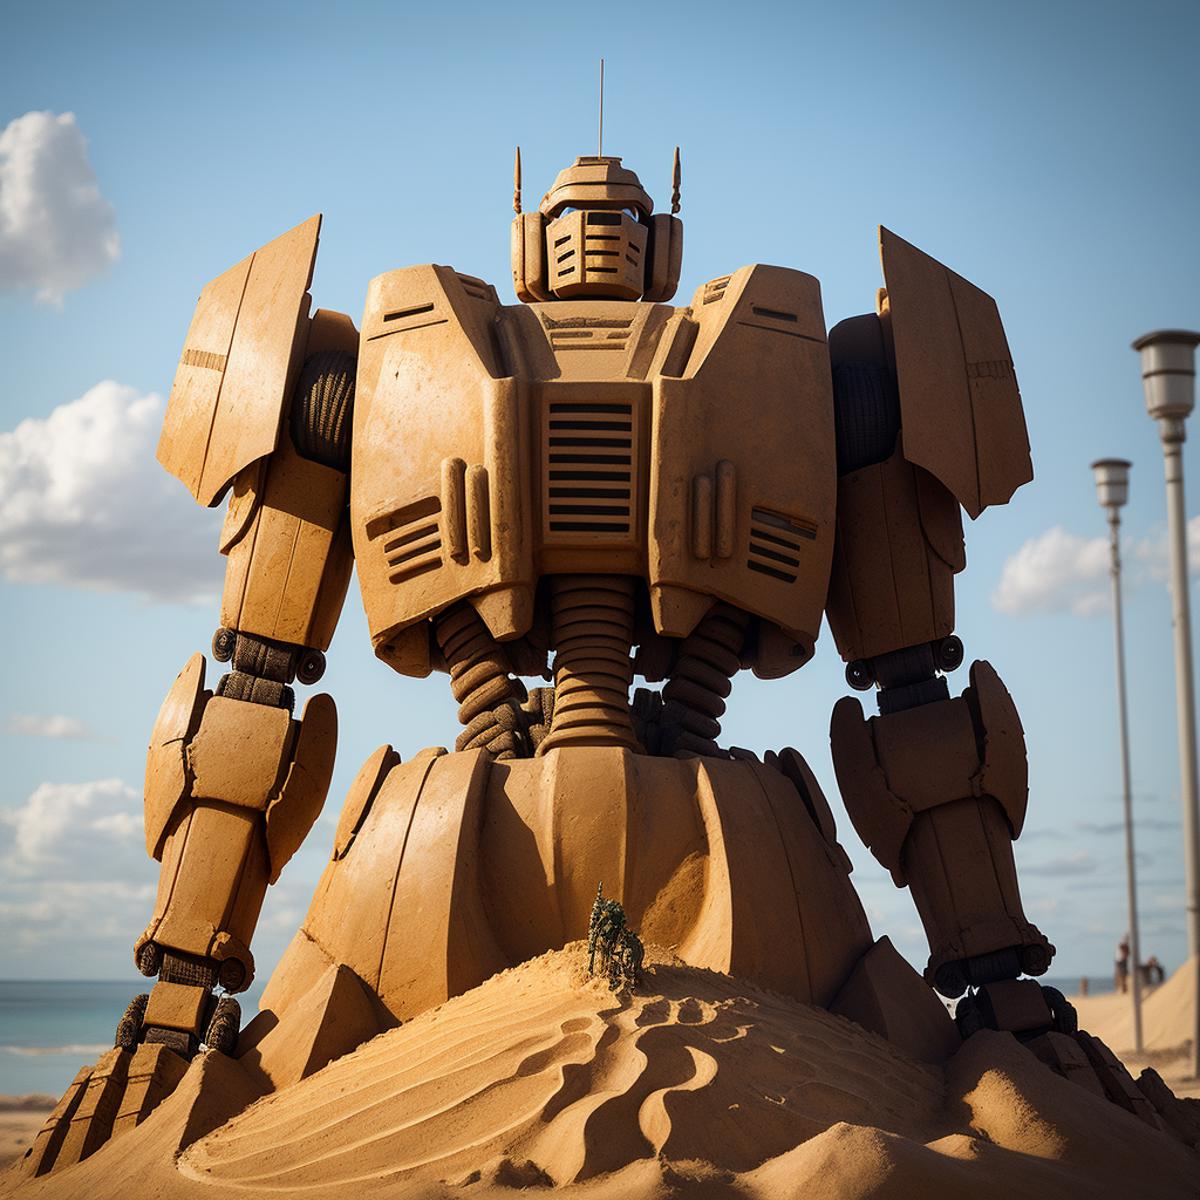 Realistic sand sculpture art style image by comingdemon